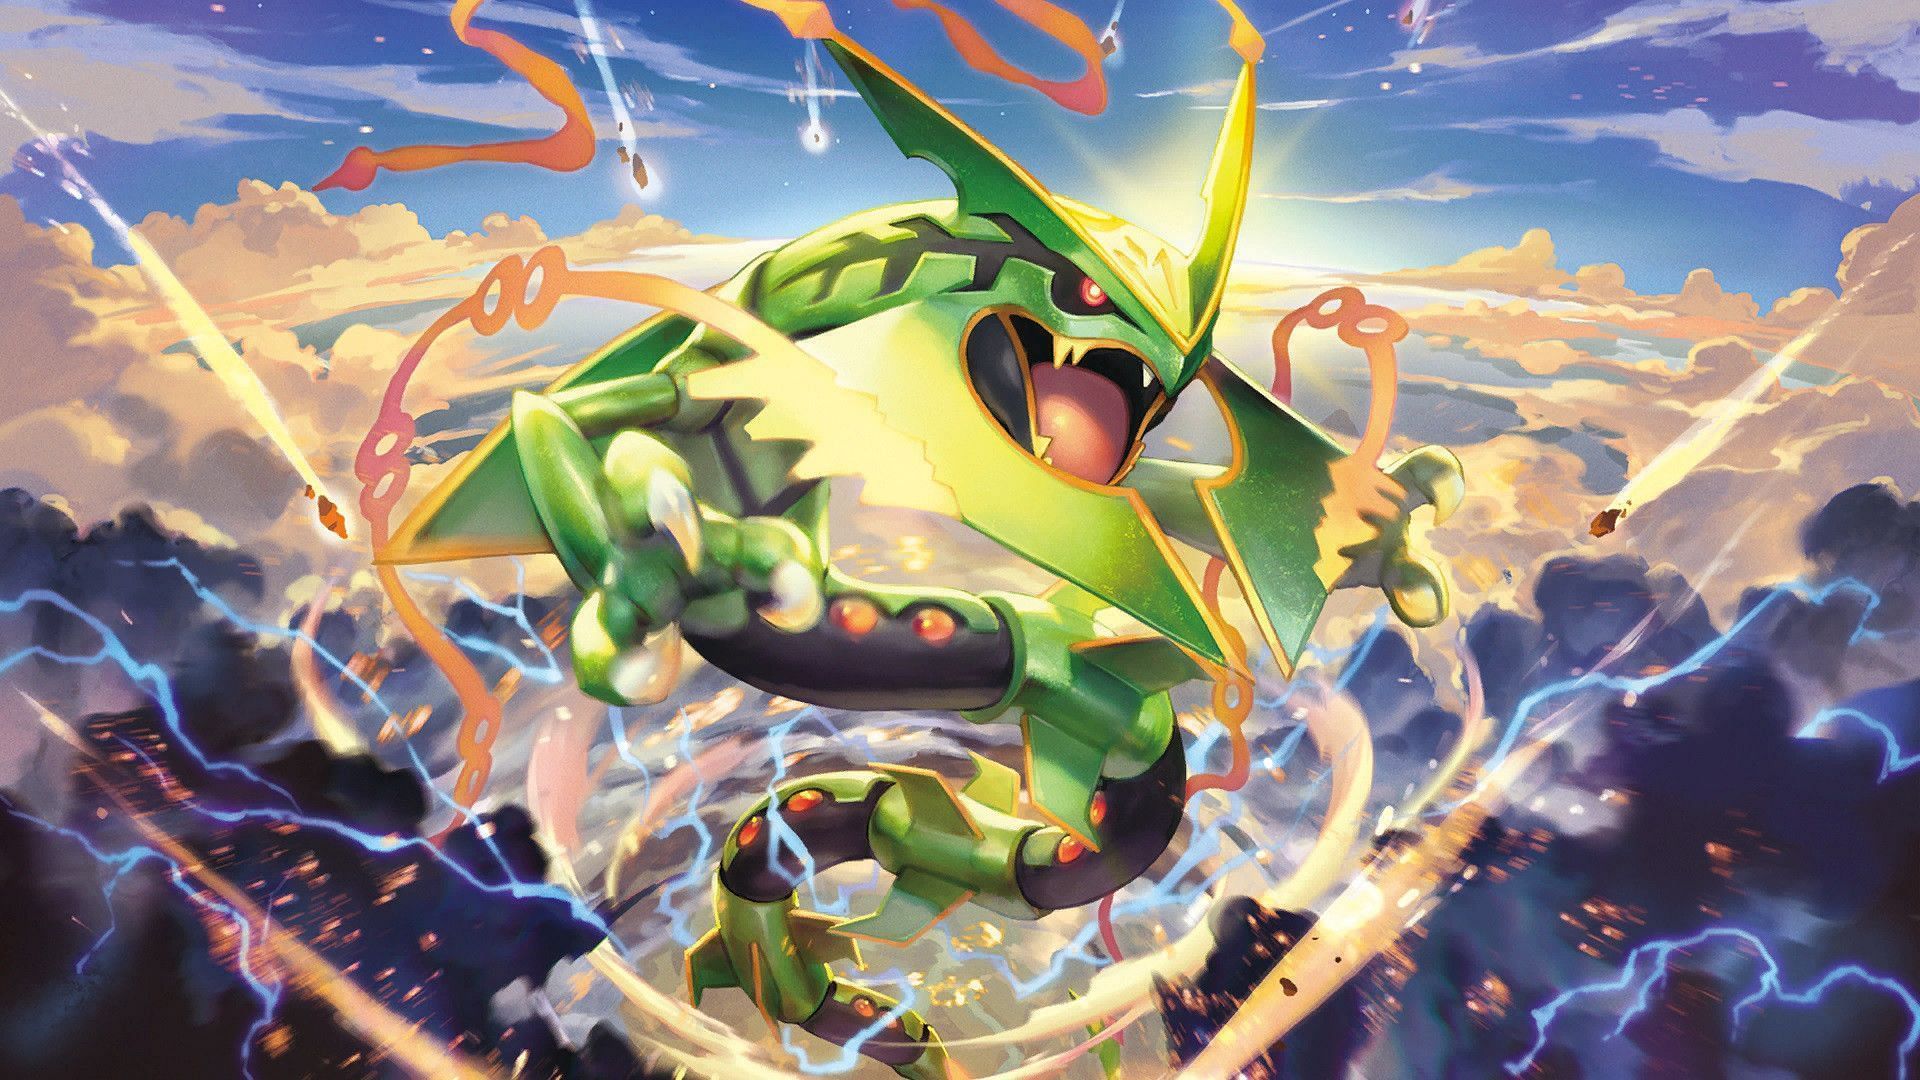 Official art for Rayquaza in its Mega-Evolved form (Image via The Pokemon Company)